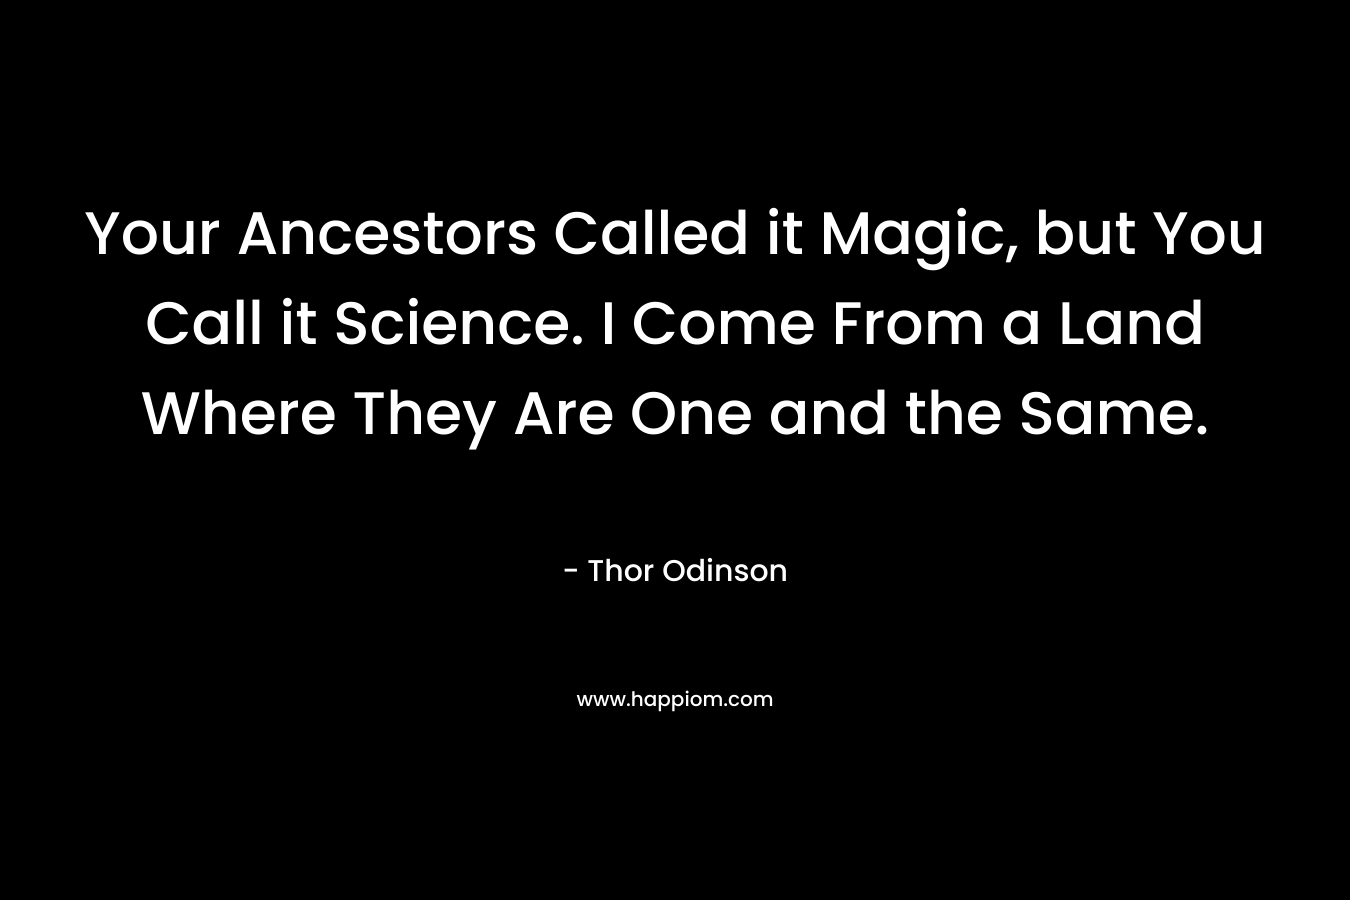 Your Ancestors Called it Magic, but You Call it Science. I Come From a Land Where They Are One and the Same.